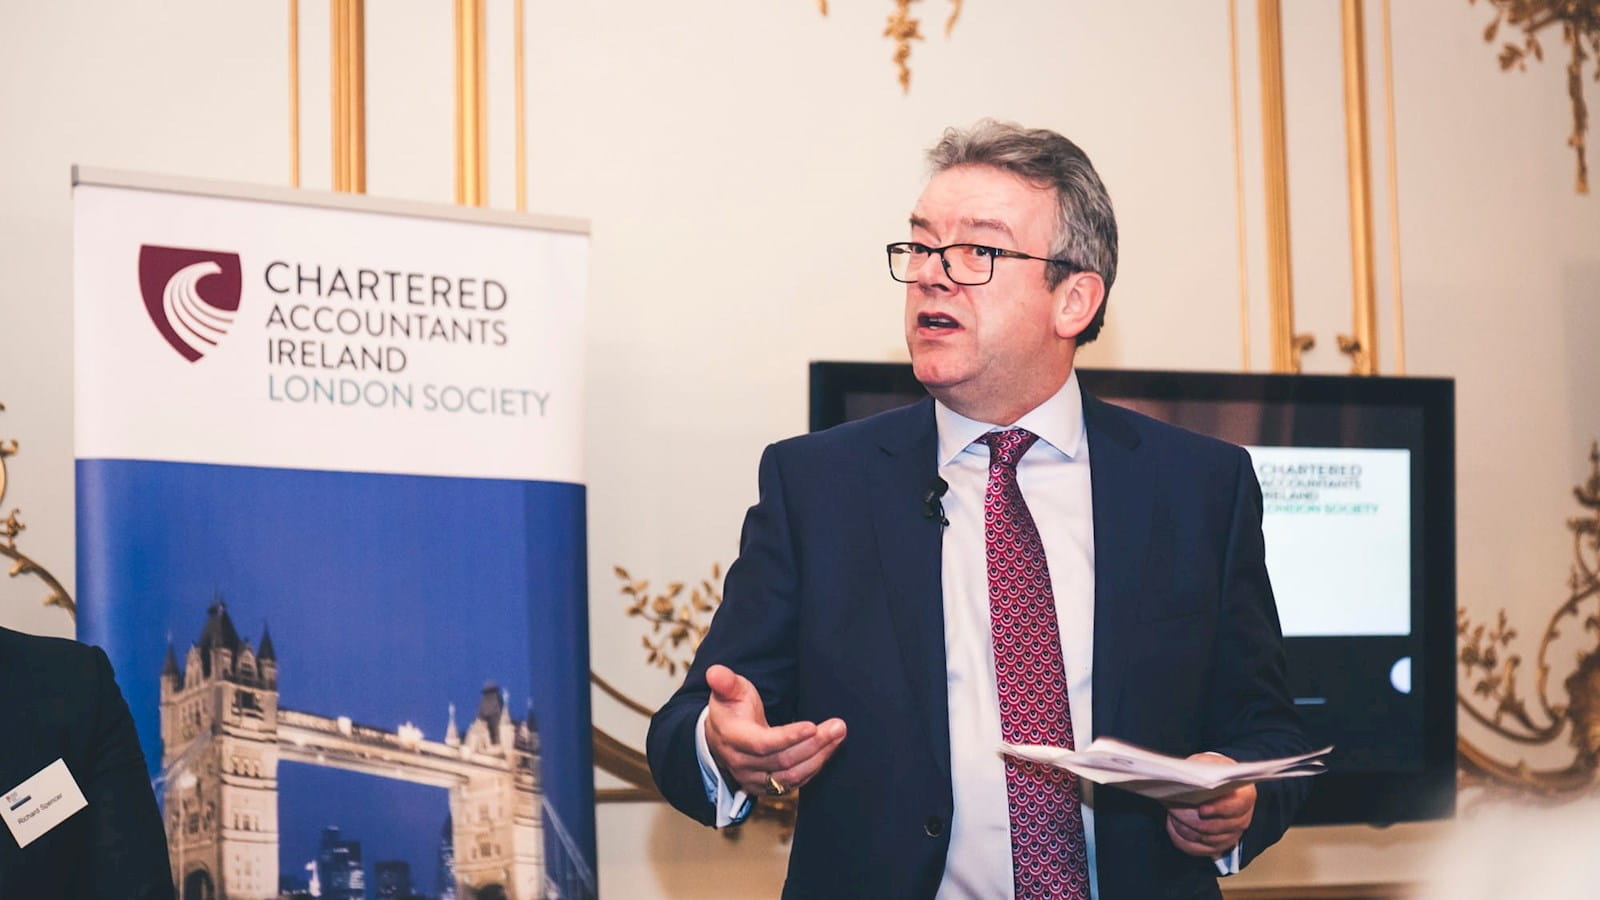 Dr Brian Keegan, Director of Advocacy and Voice for Chartered Accountants Ireland (CAI), speaking at a CAI London Society event in February 2020